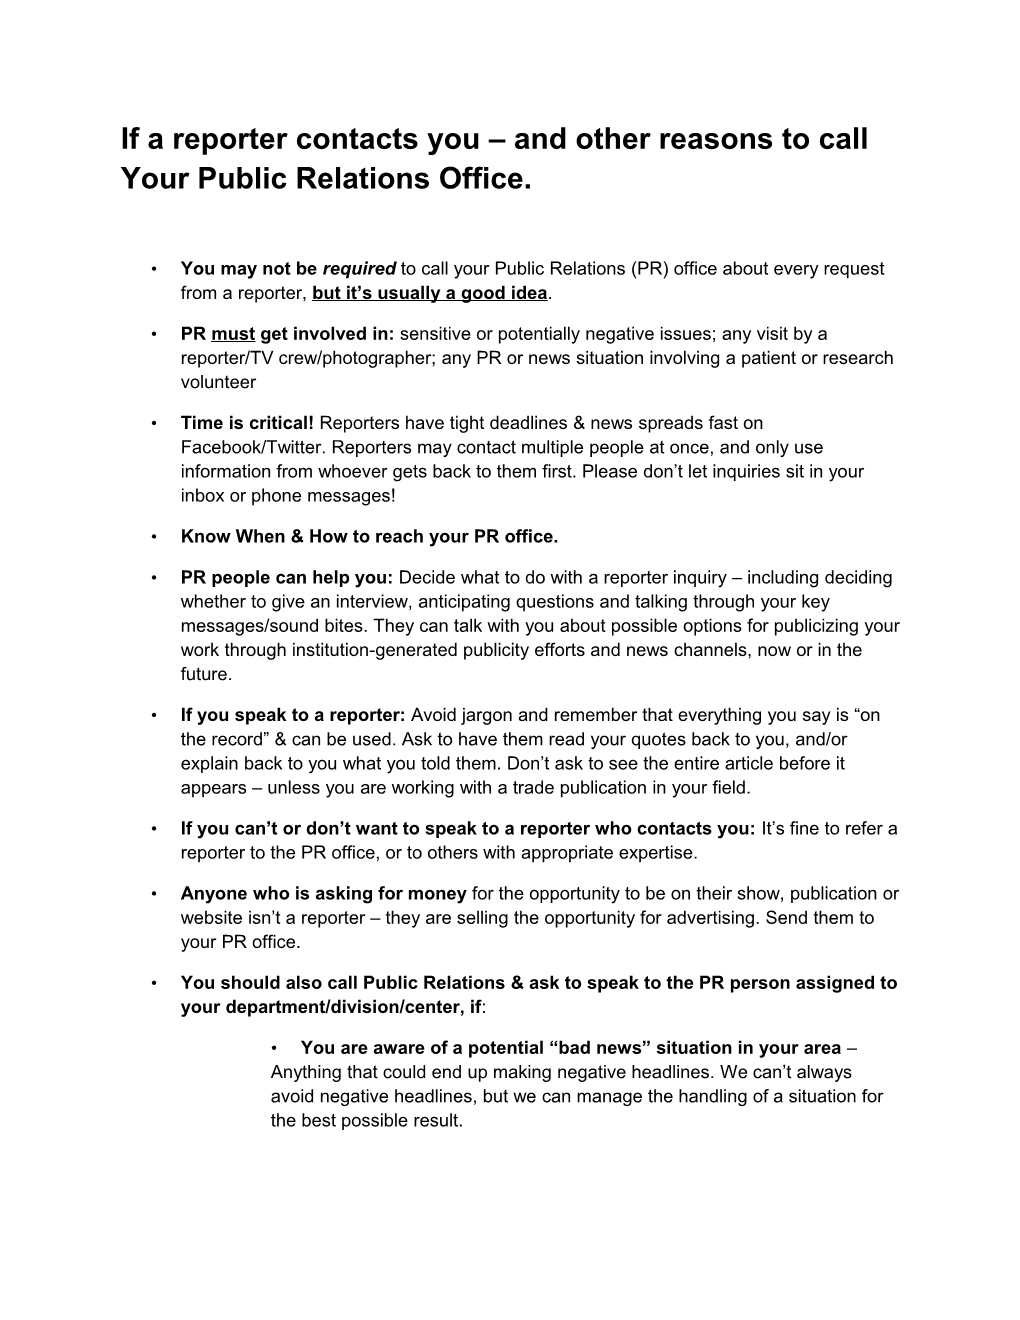 If a Reporter Contacts You and Other Reasons to Call Your Public Relations Office